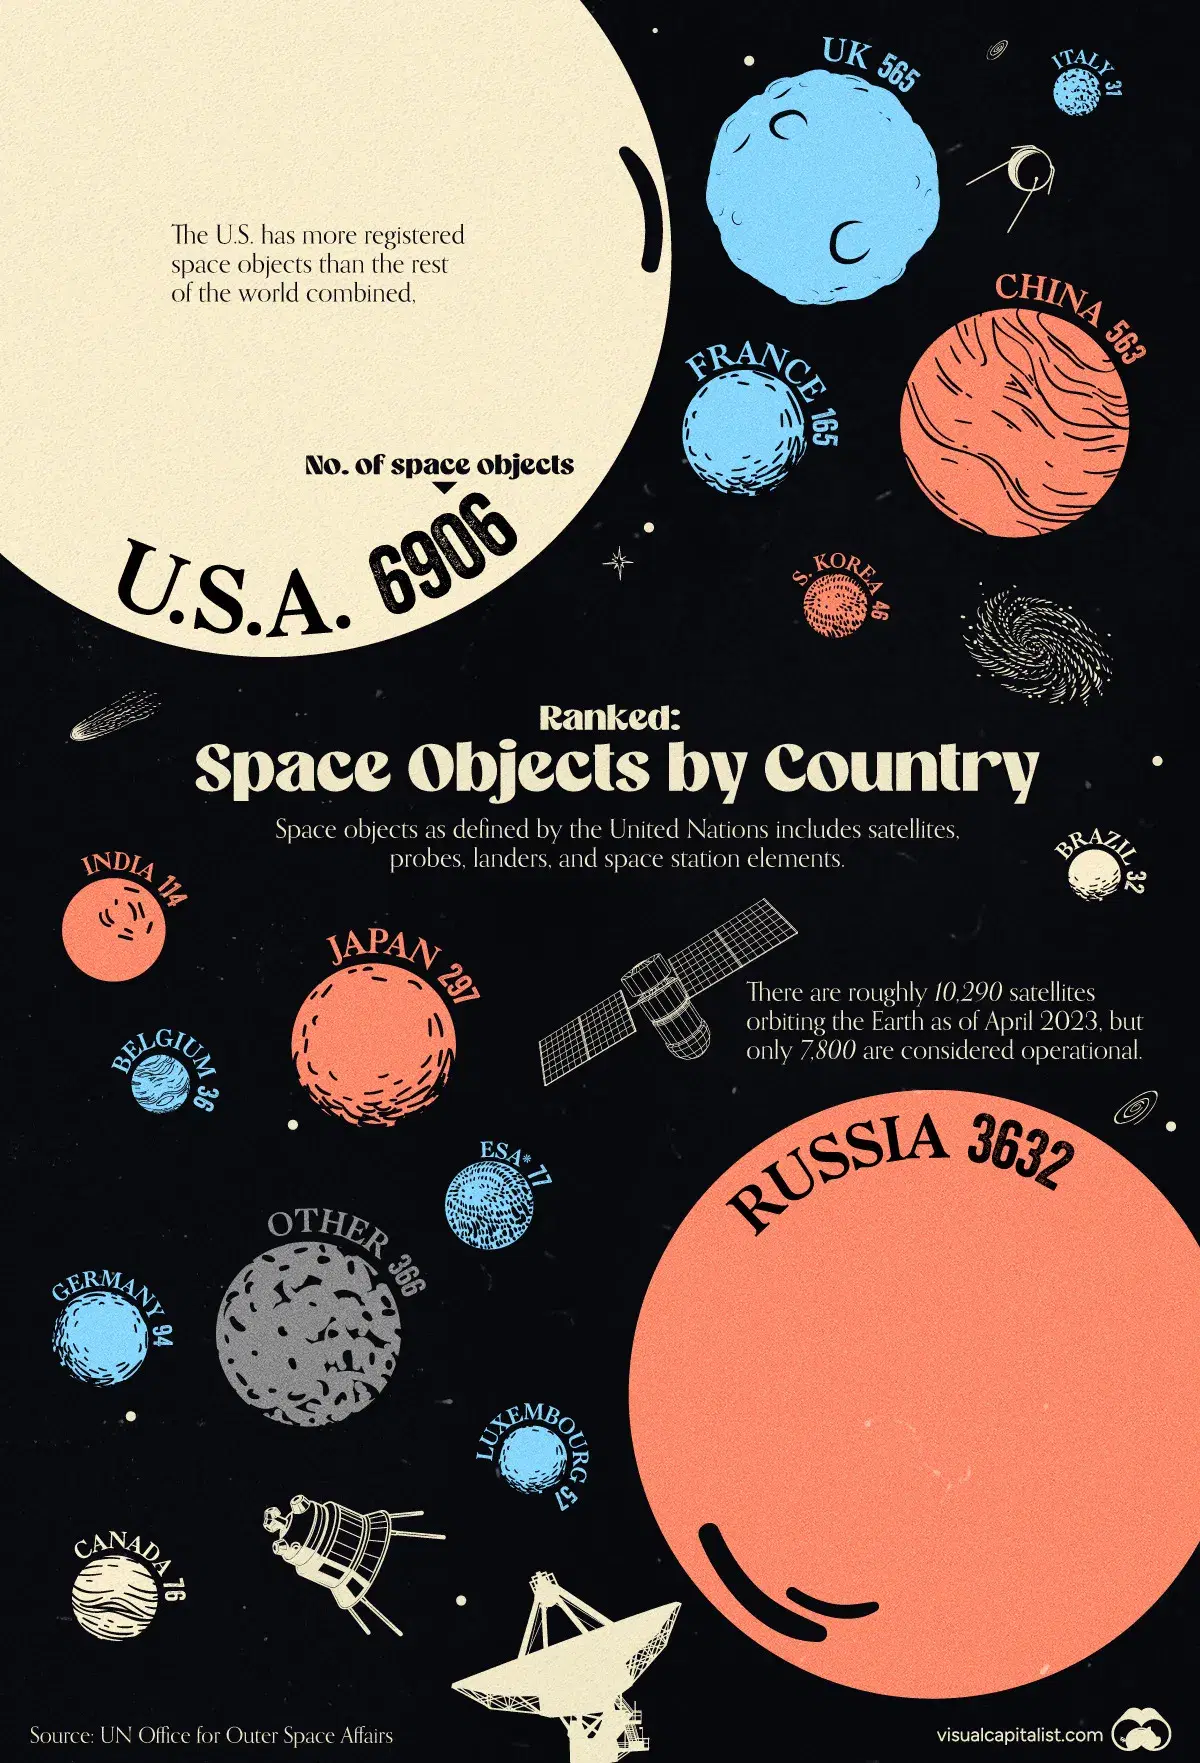 Visualizing the Number of Space Objects by Country